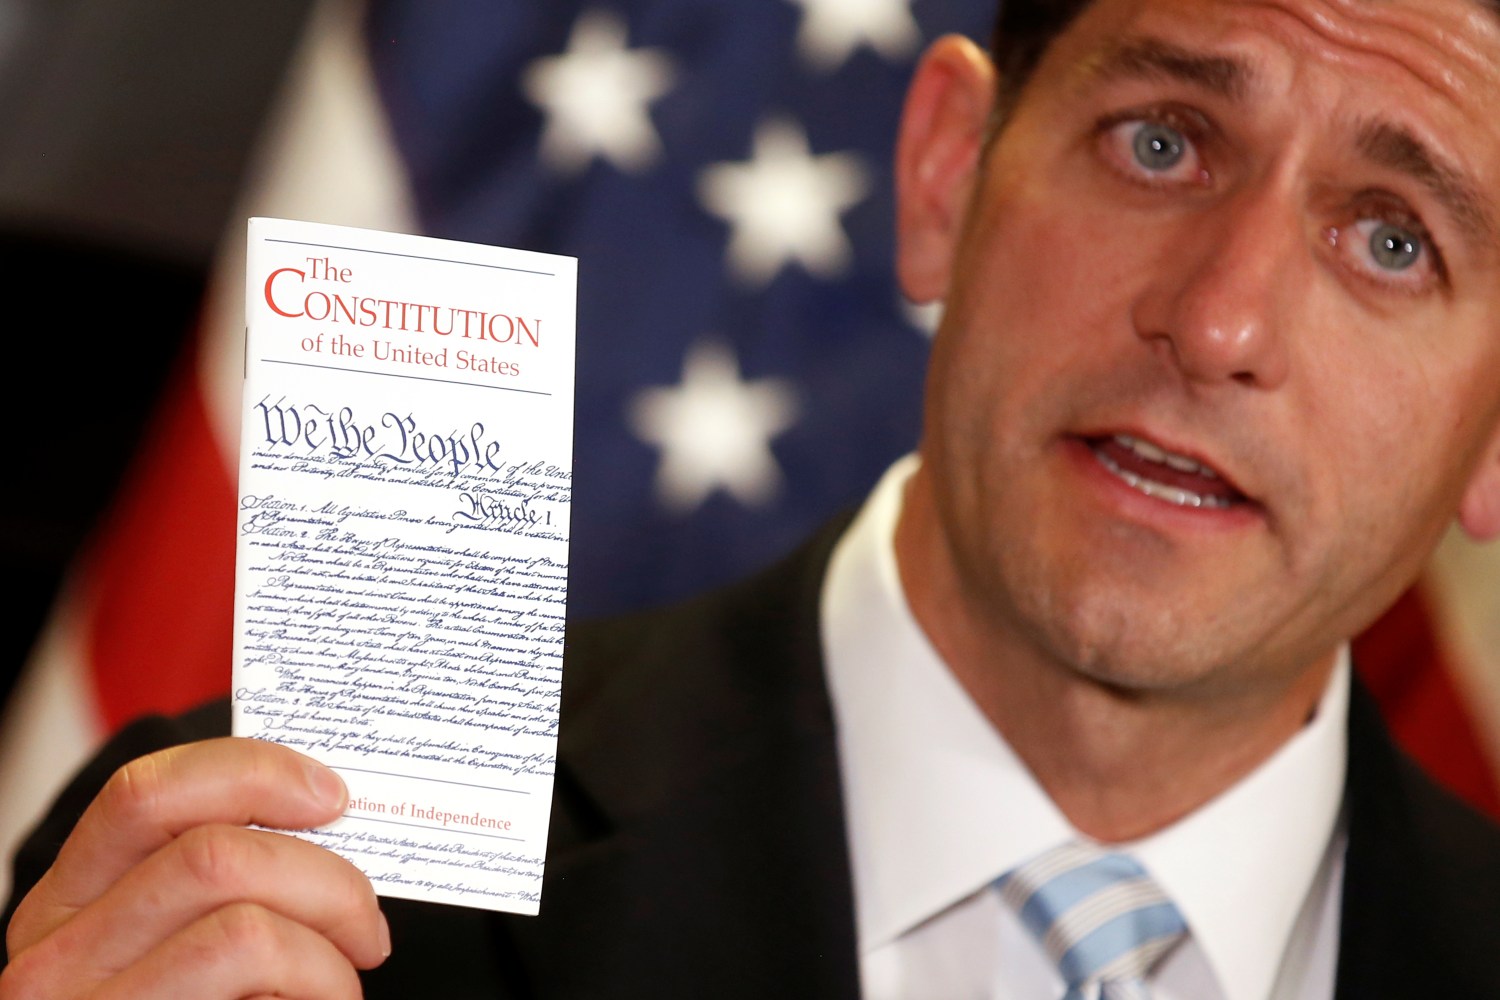 U.S. House Speaker Paul Ryan (R-WI) holds a copy of the United States constitution